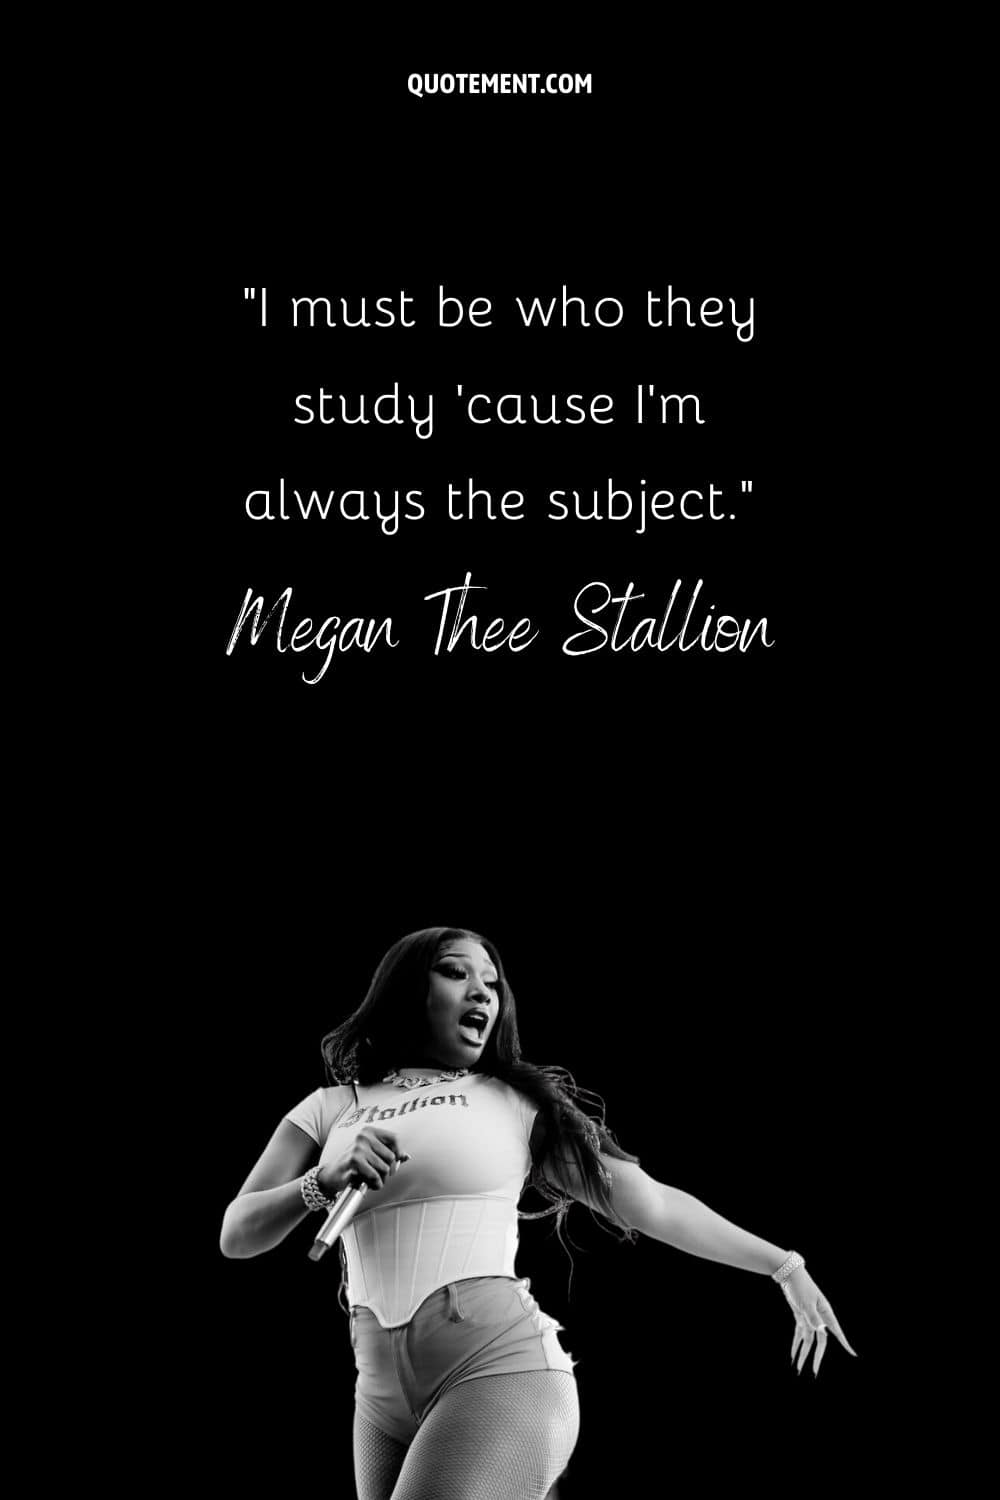 “I must be who they study ’cause I’m always the subject.” — Megan Thee Stallion